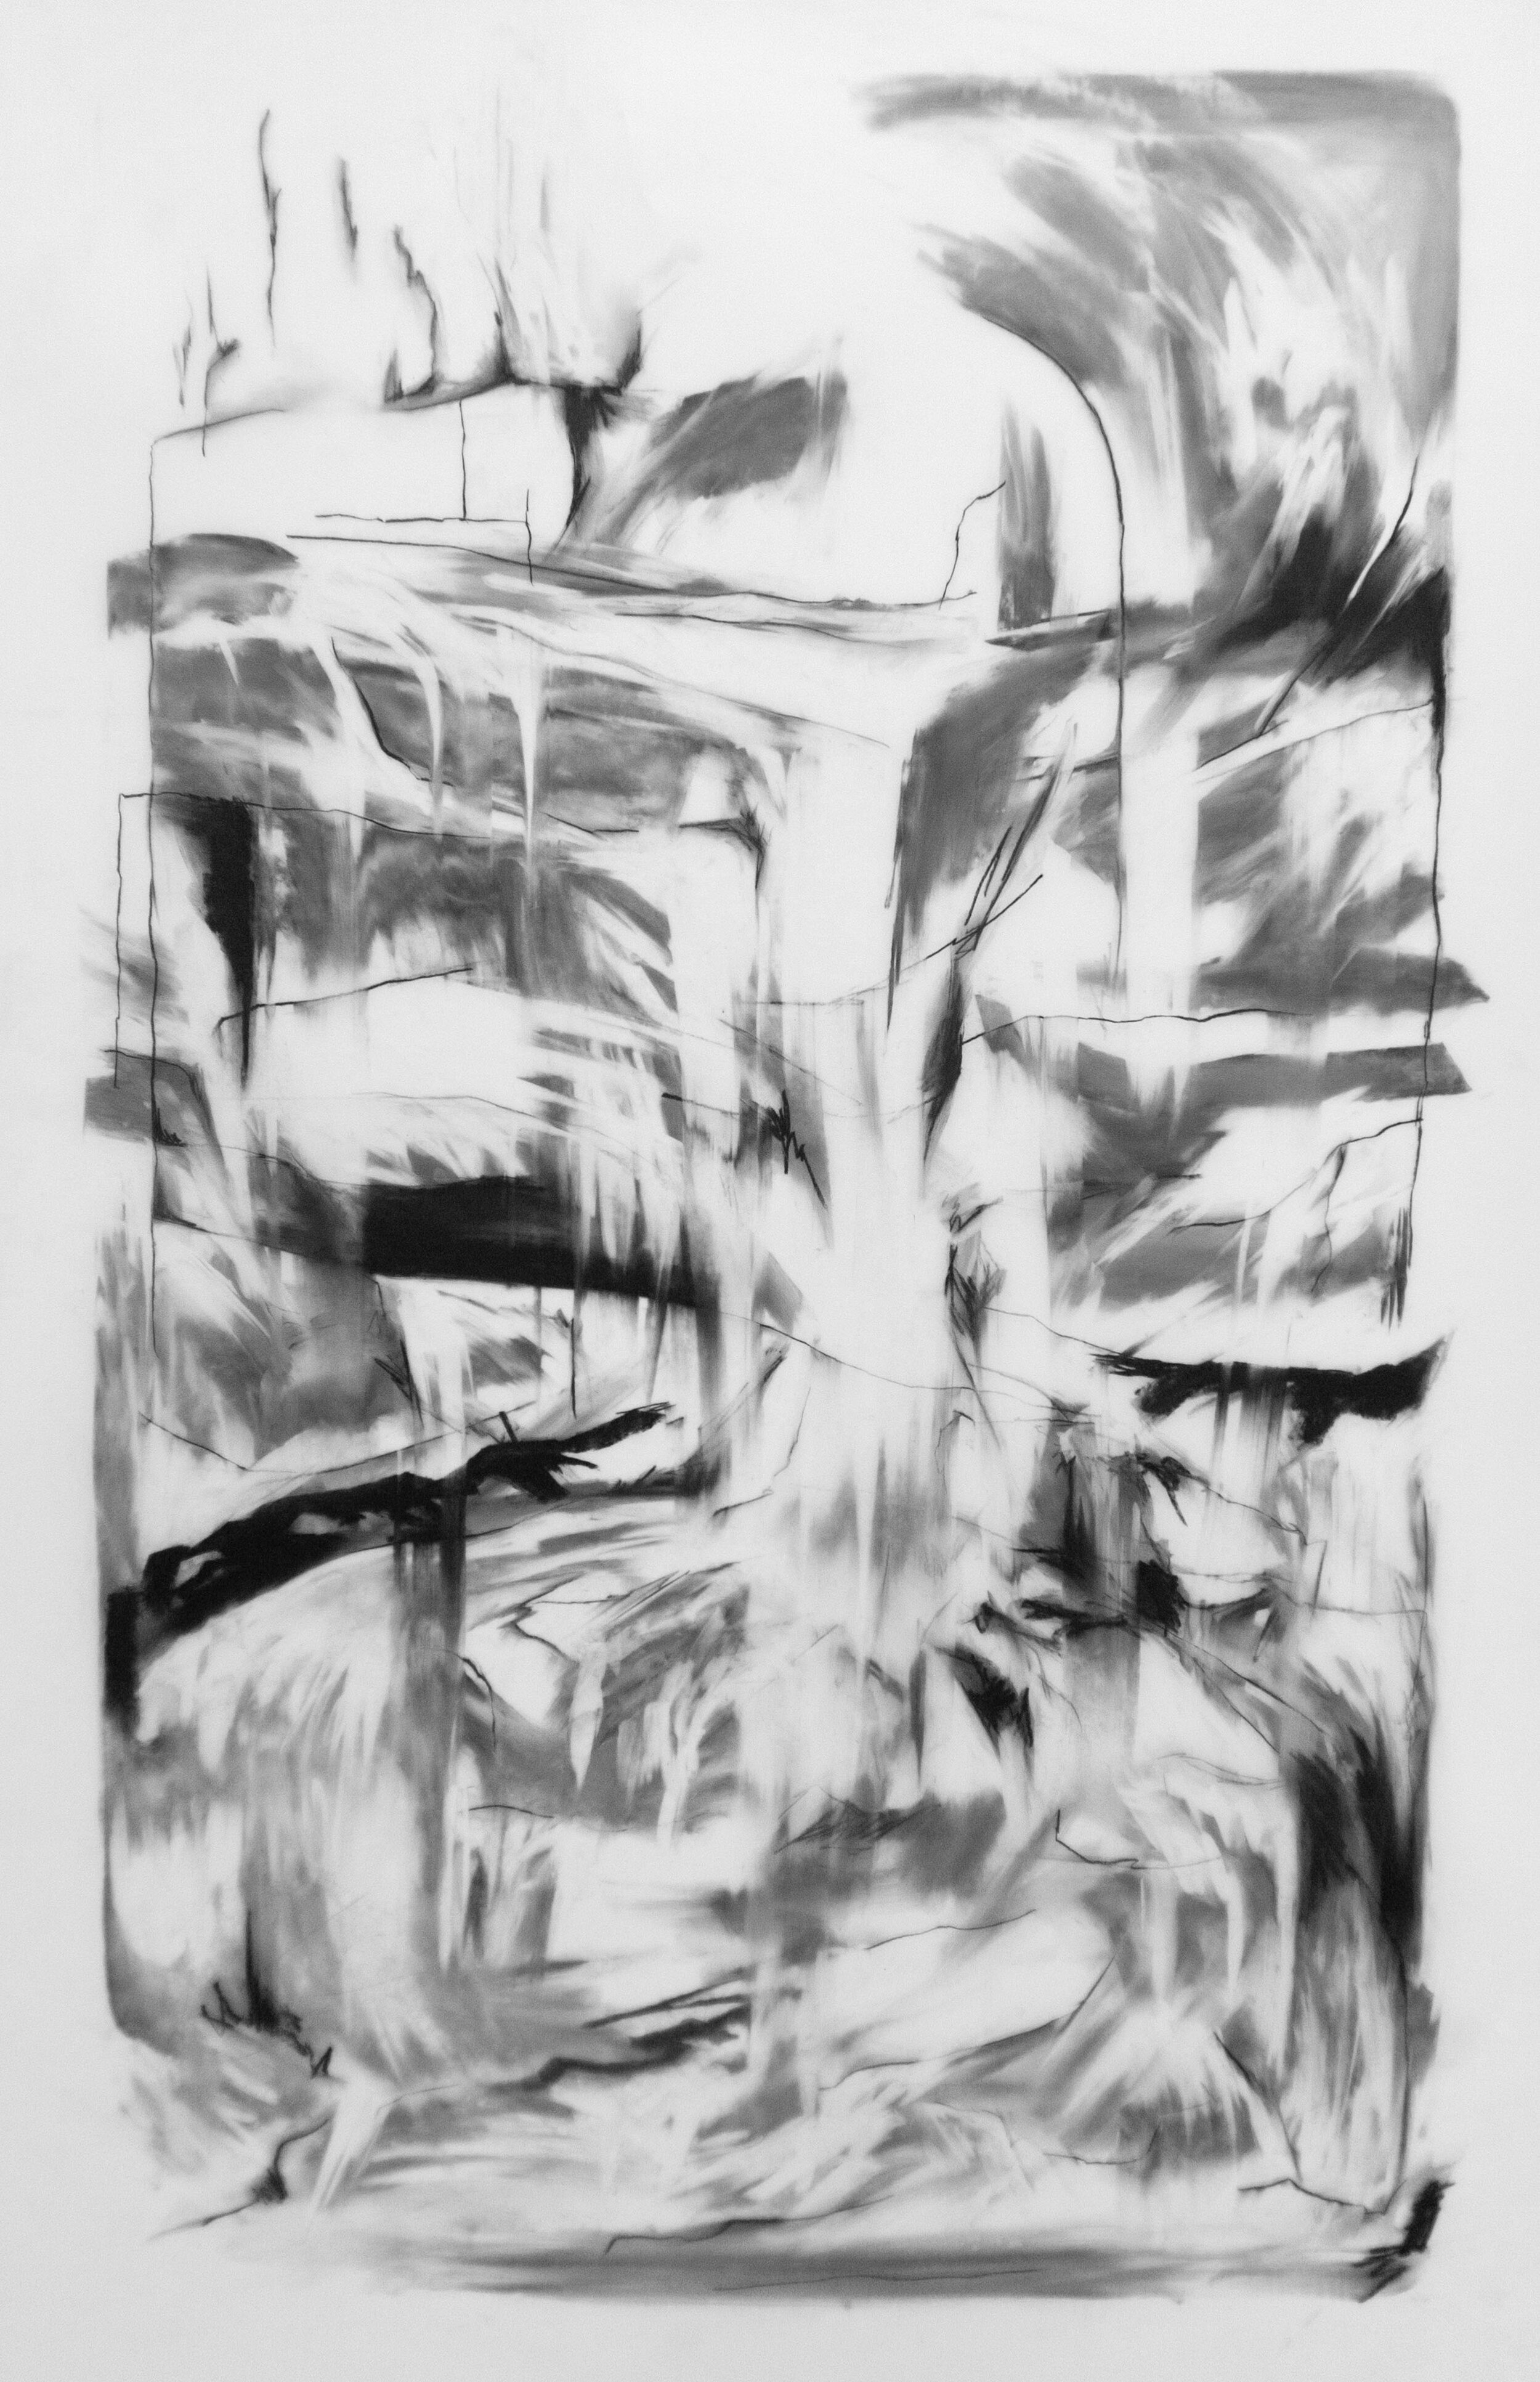   “Submerge”   24” x 36”, charcoal on vellum/framed in maple  2021,  sold  